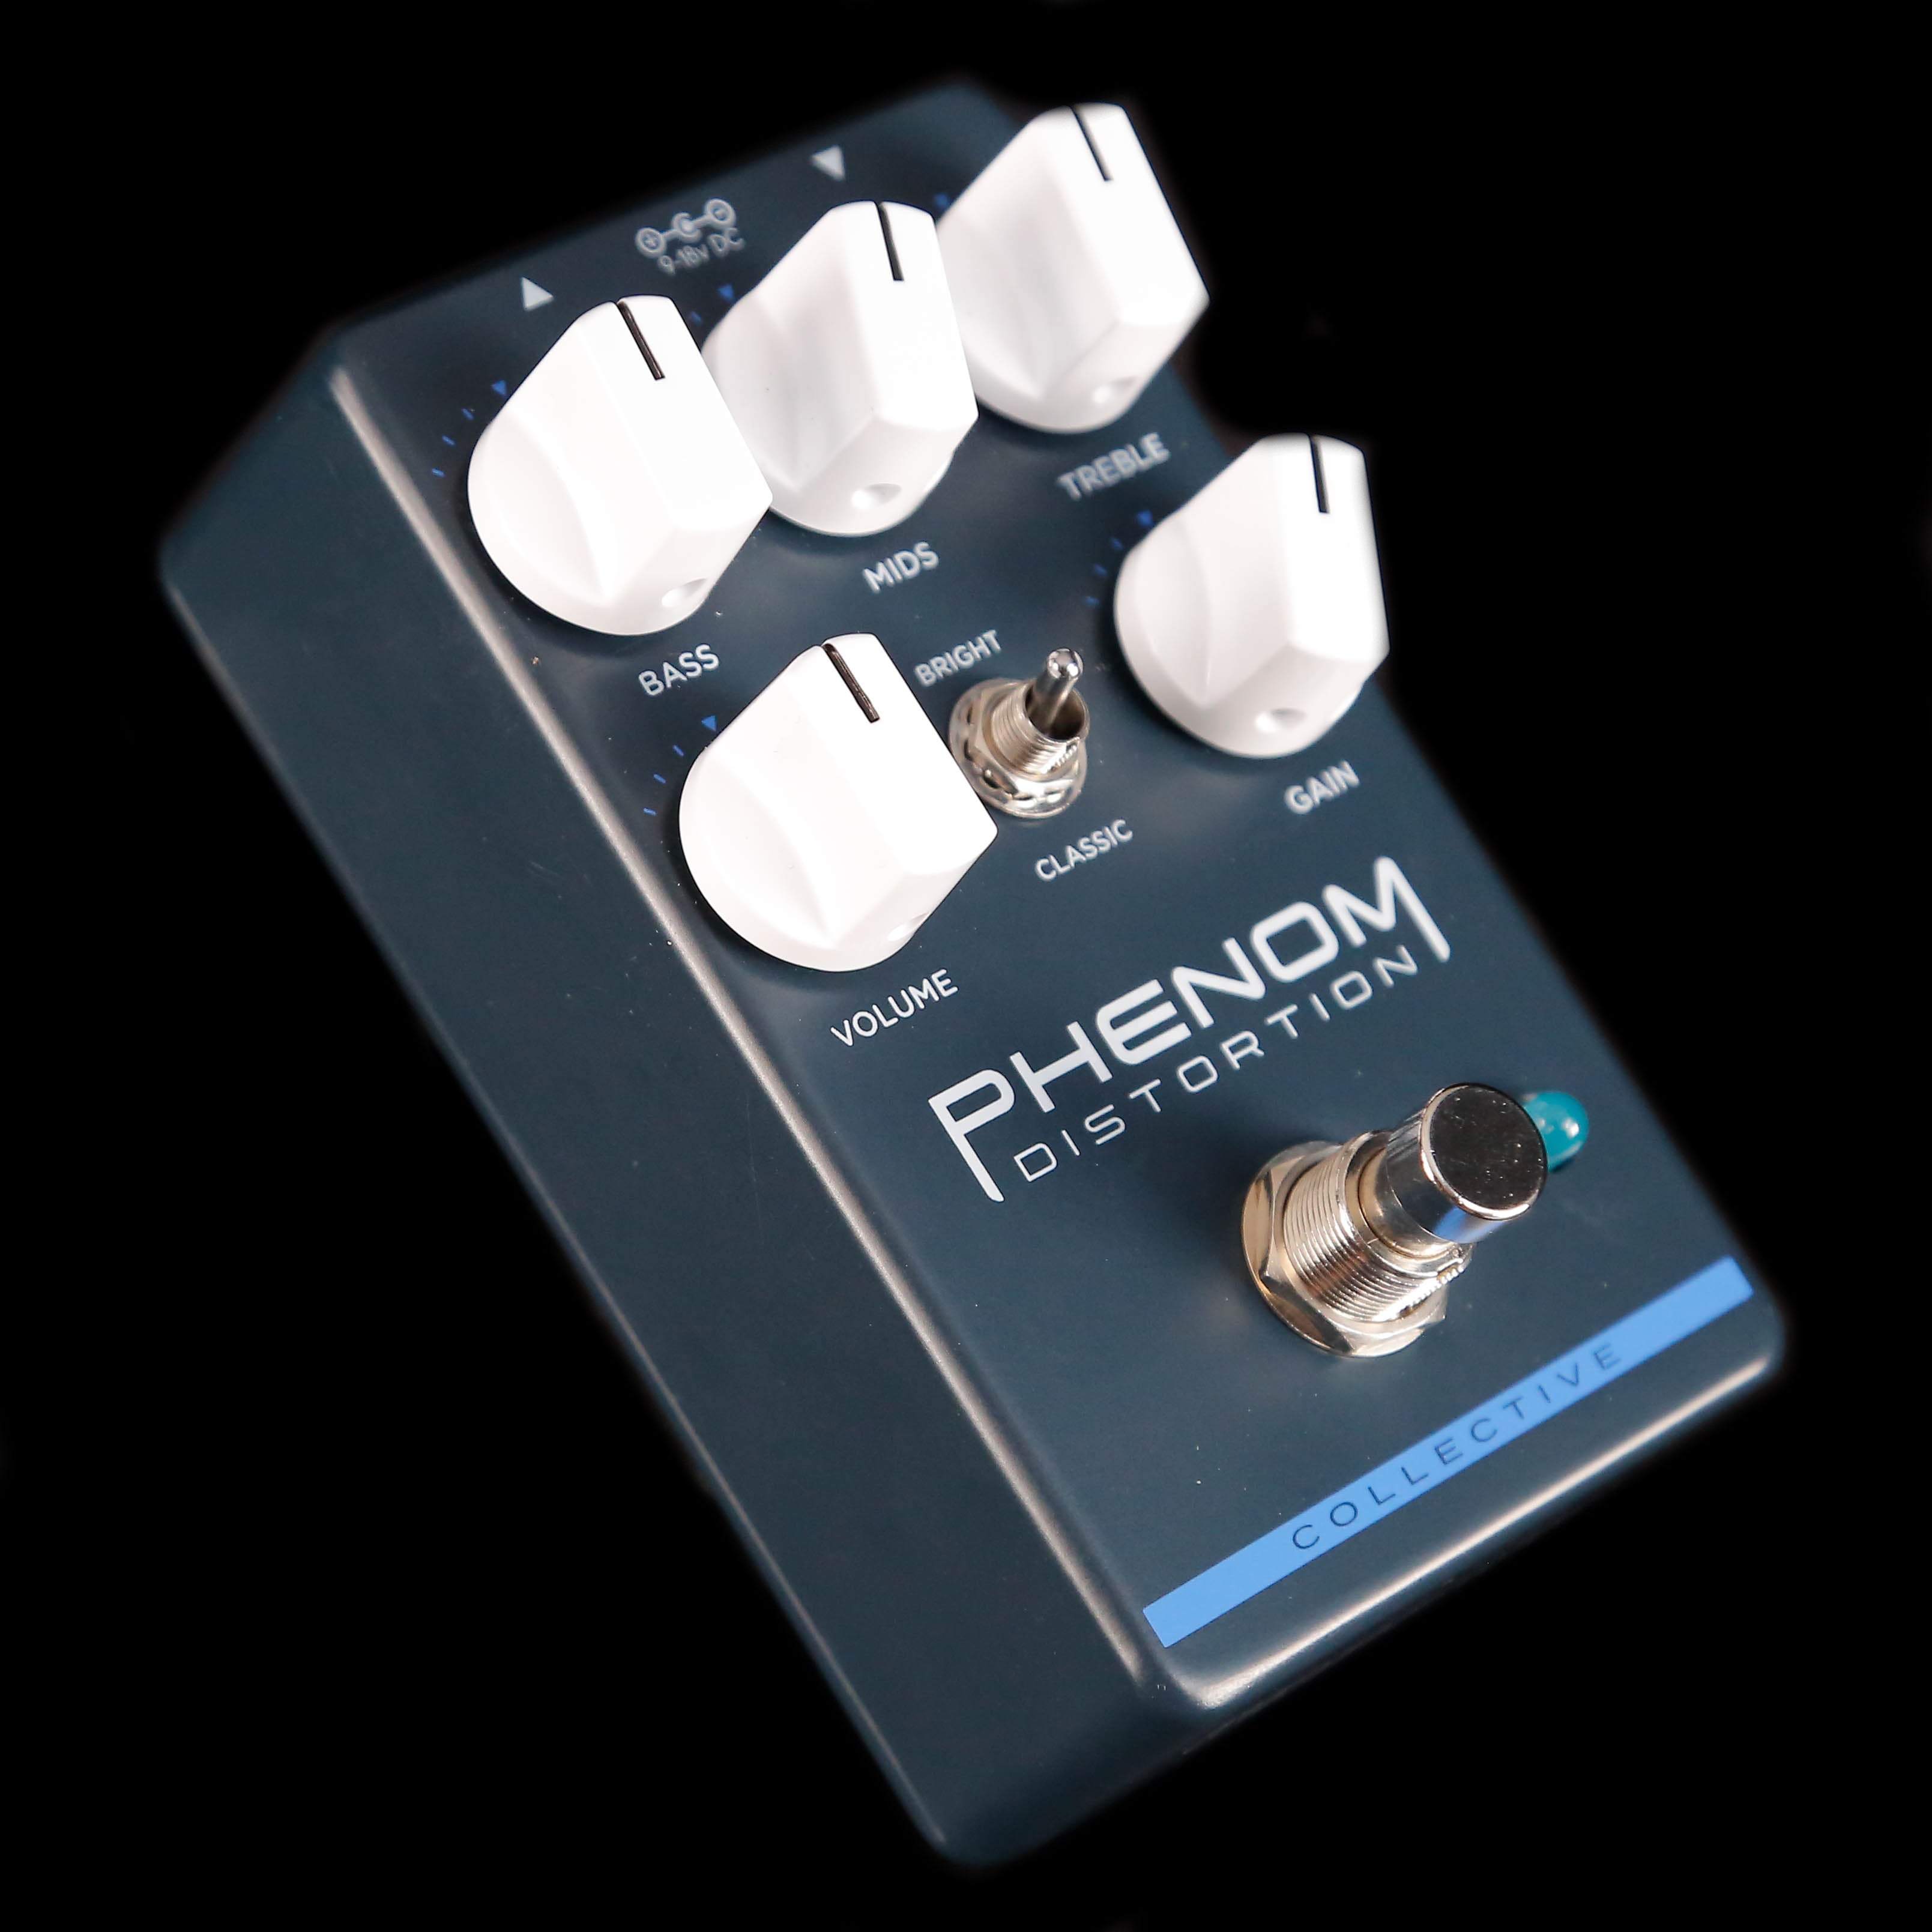 Wampler Collective Series Phenom Distortion Pedal